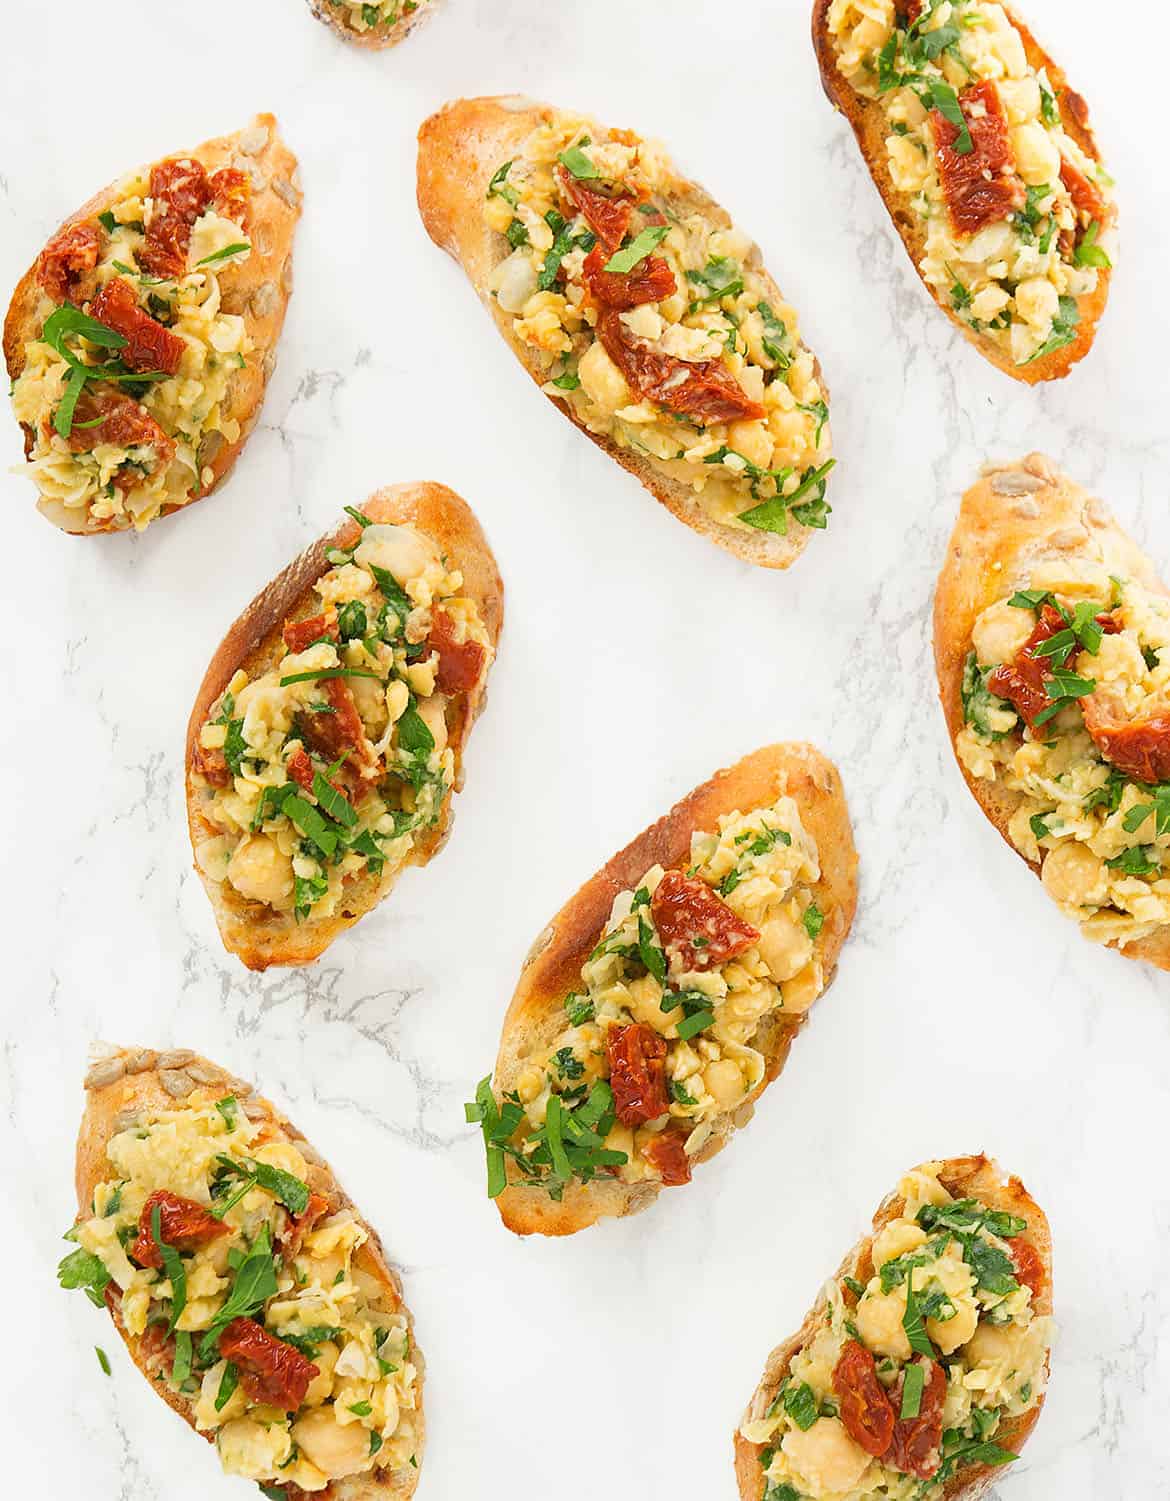 Top view of vegan chickpea bruschetta over a white background.